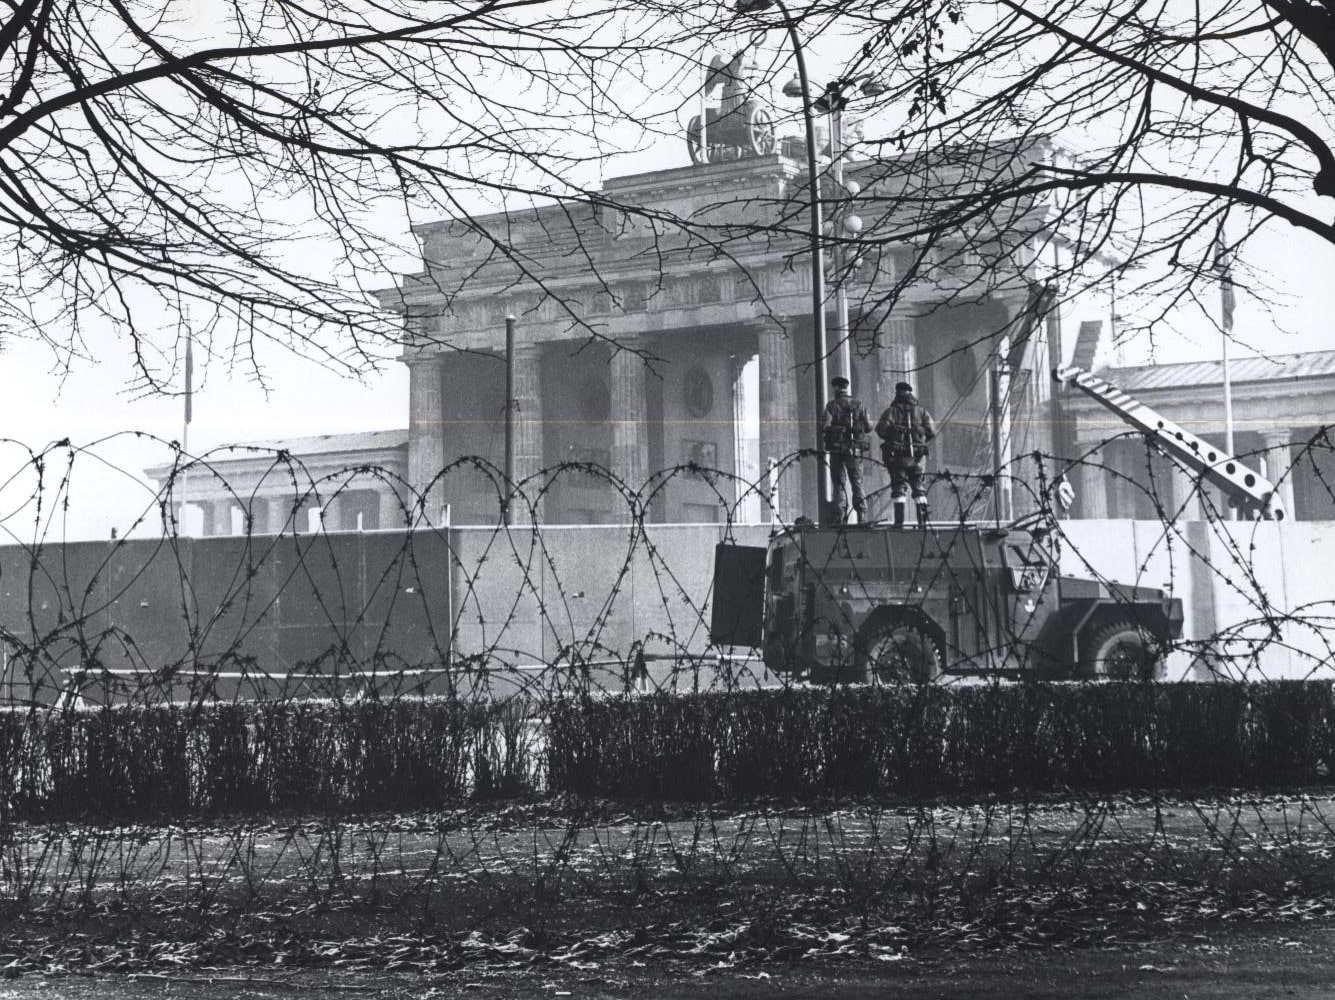 Construction of the Berlin Wall at the Brandenburg Gate